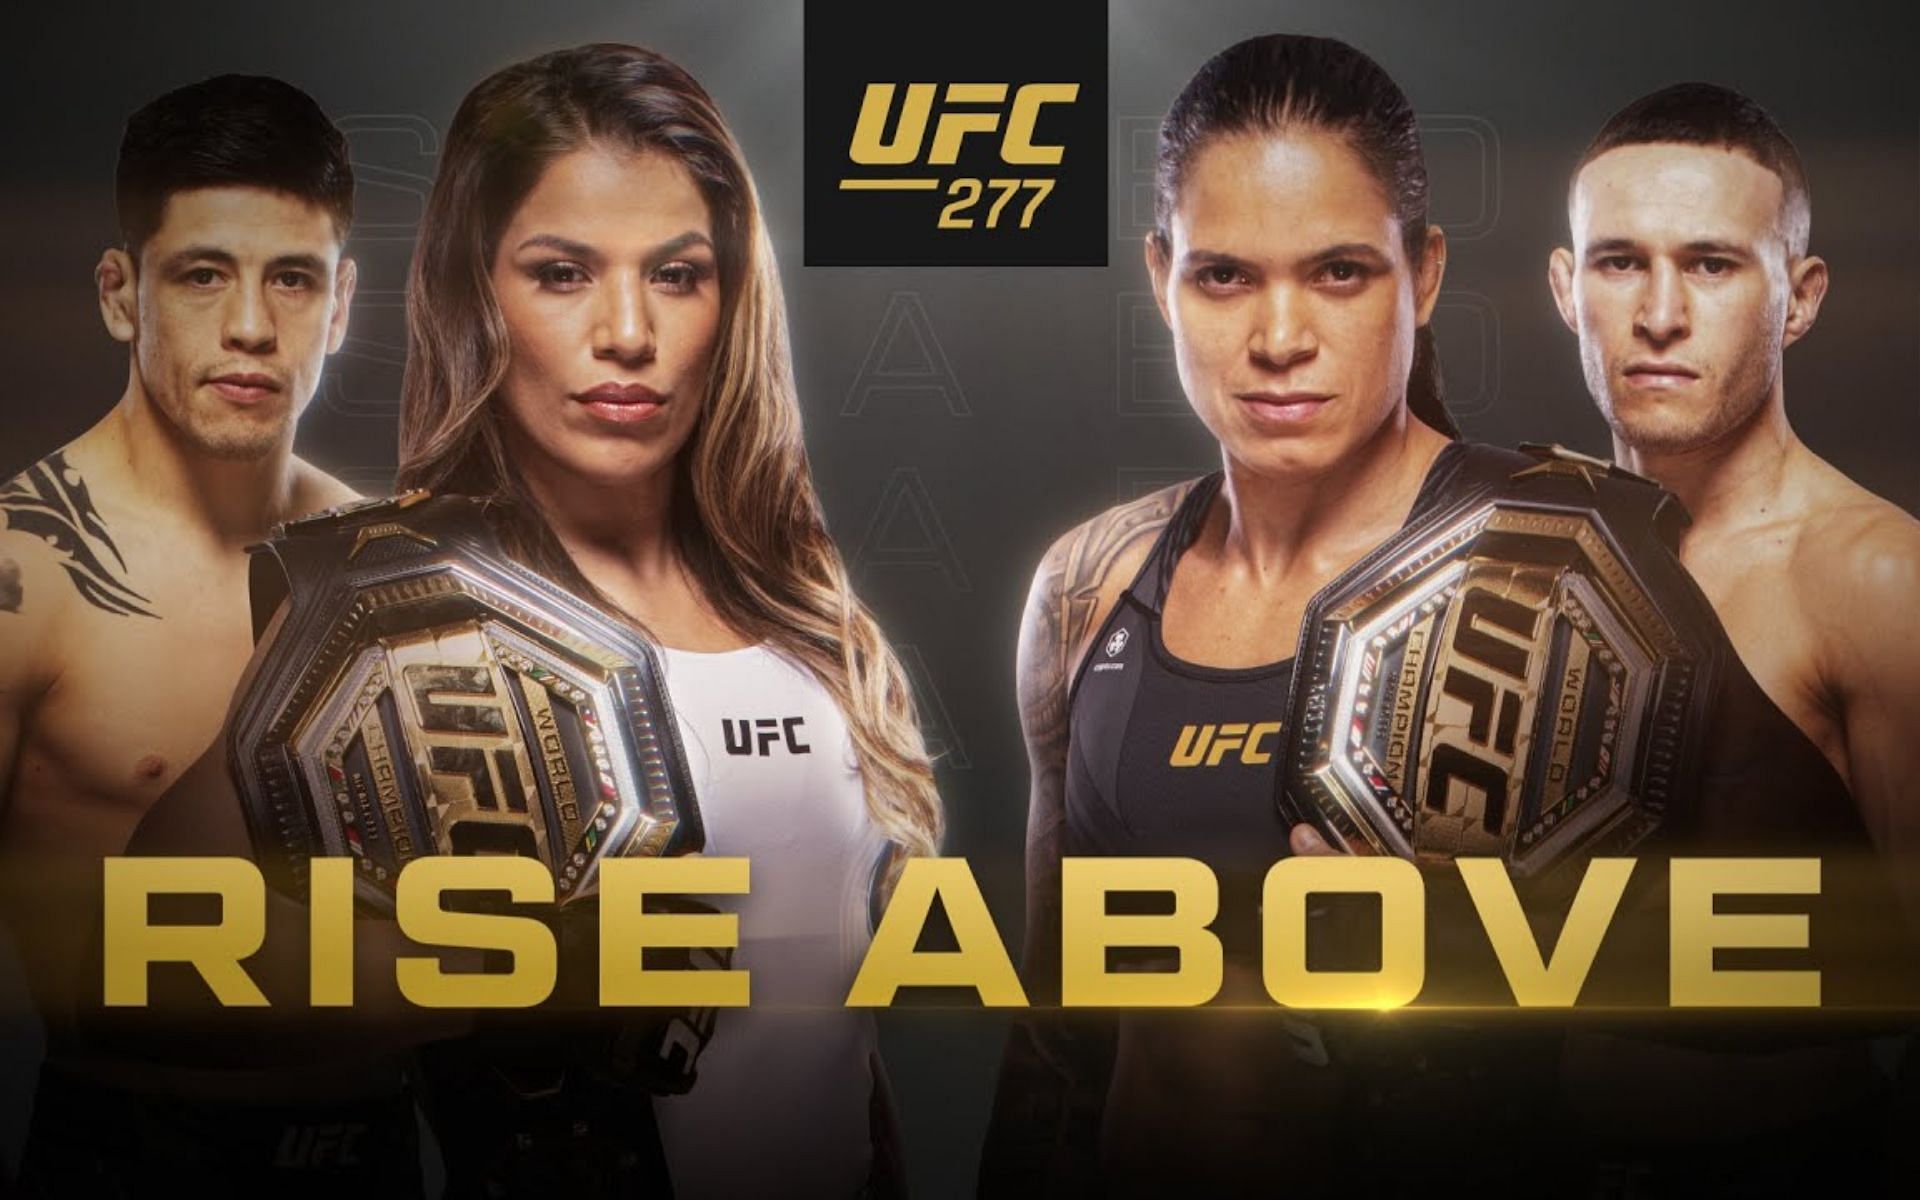 Julianna Pena and Amanda Nunes face off in a huge rematch this weekend